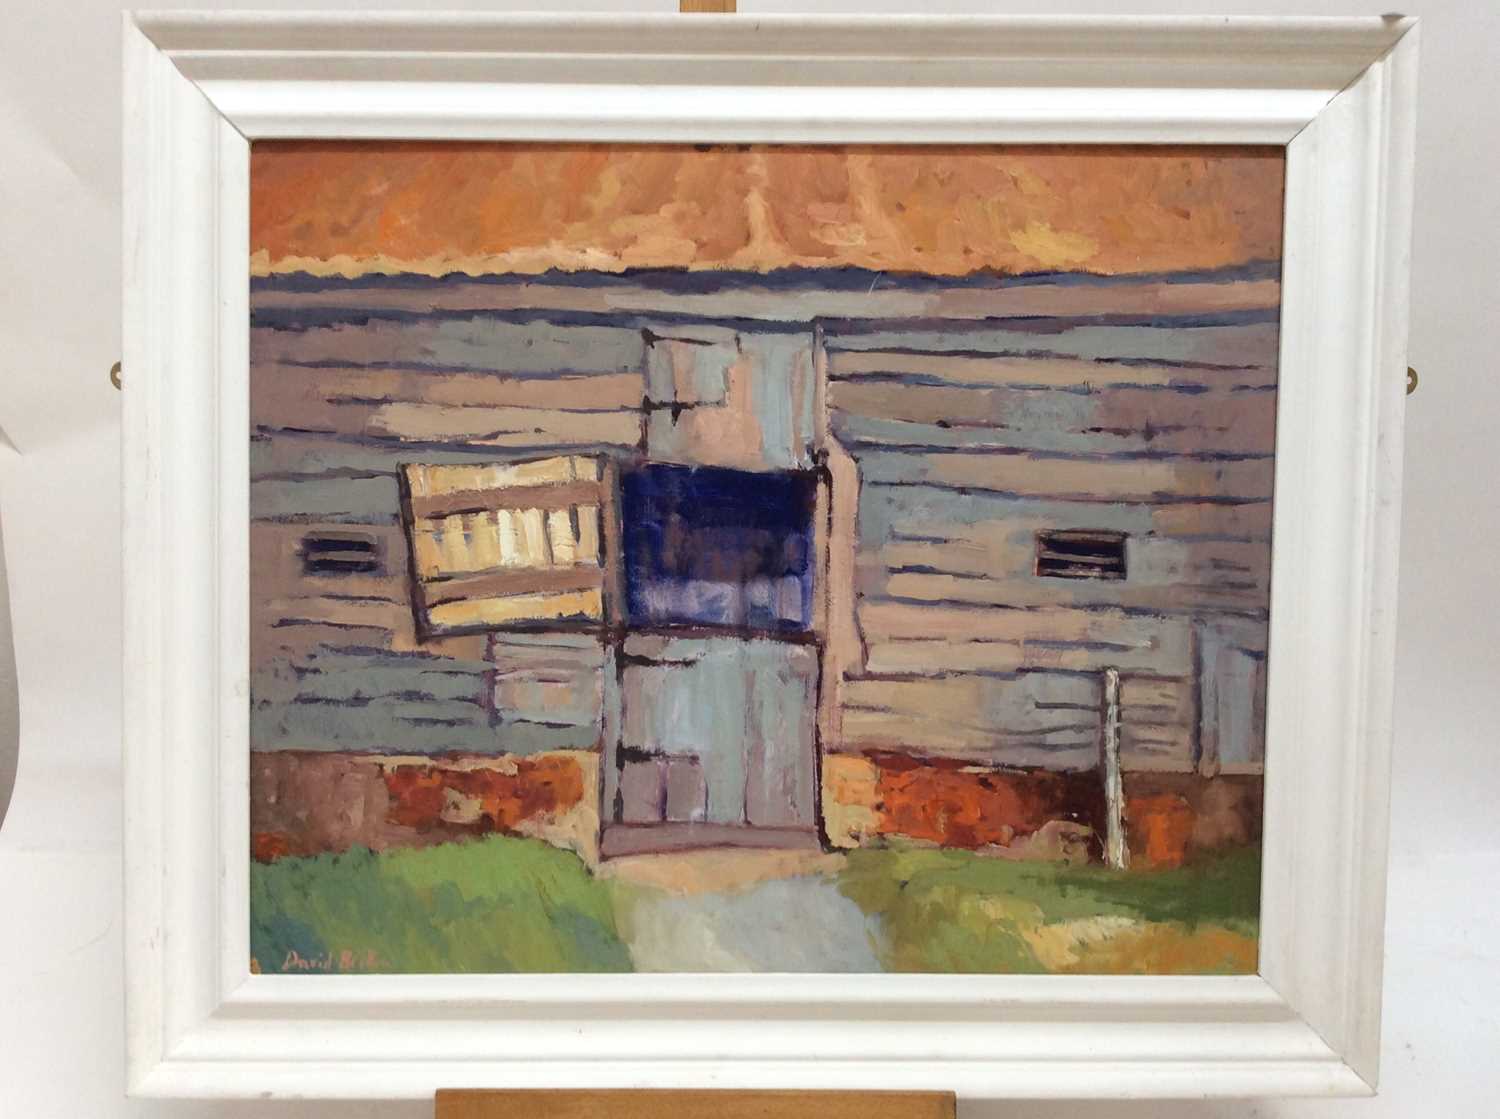 David Britton, contemporary, oil on board - Stable Door, signed and framed - Image 2 of 4